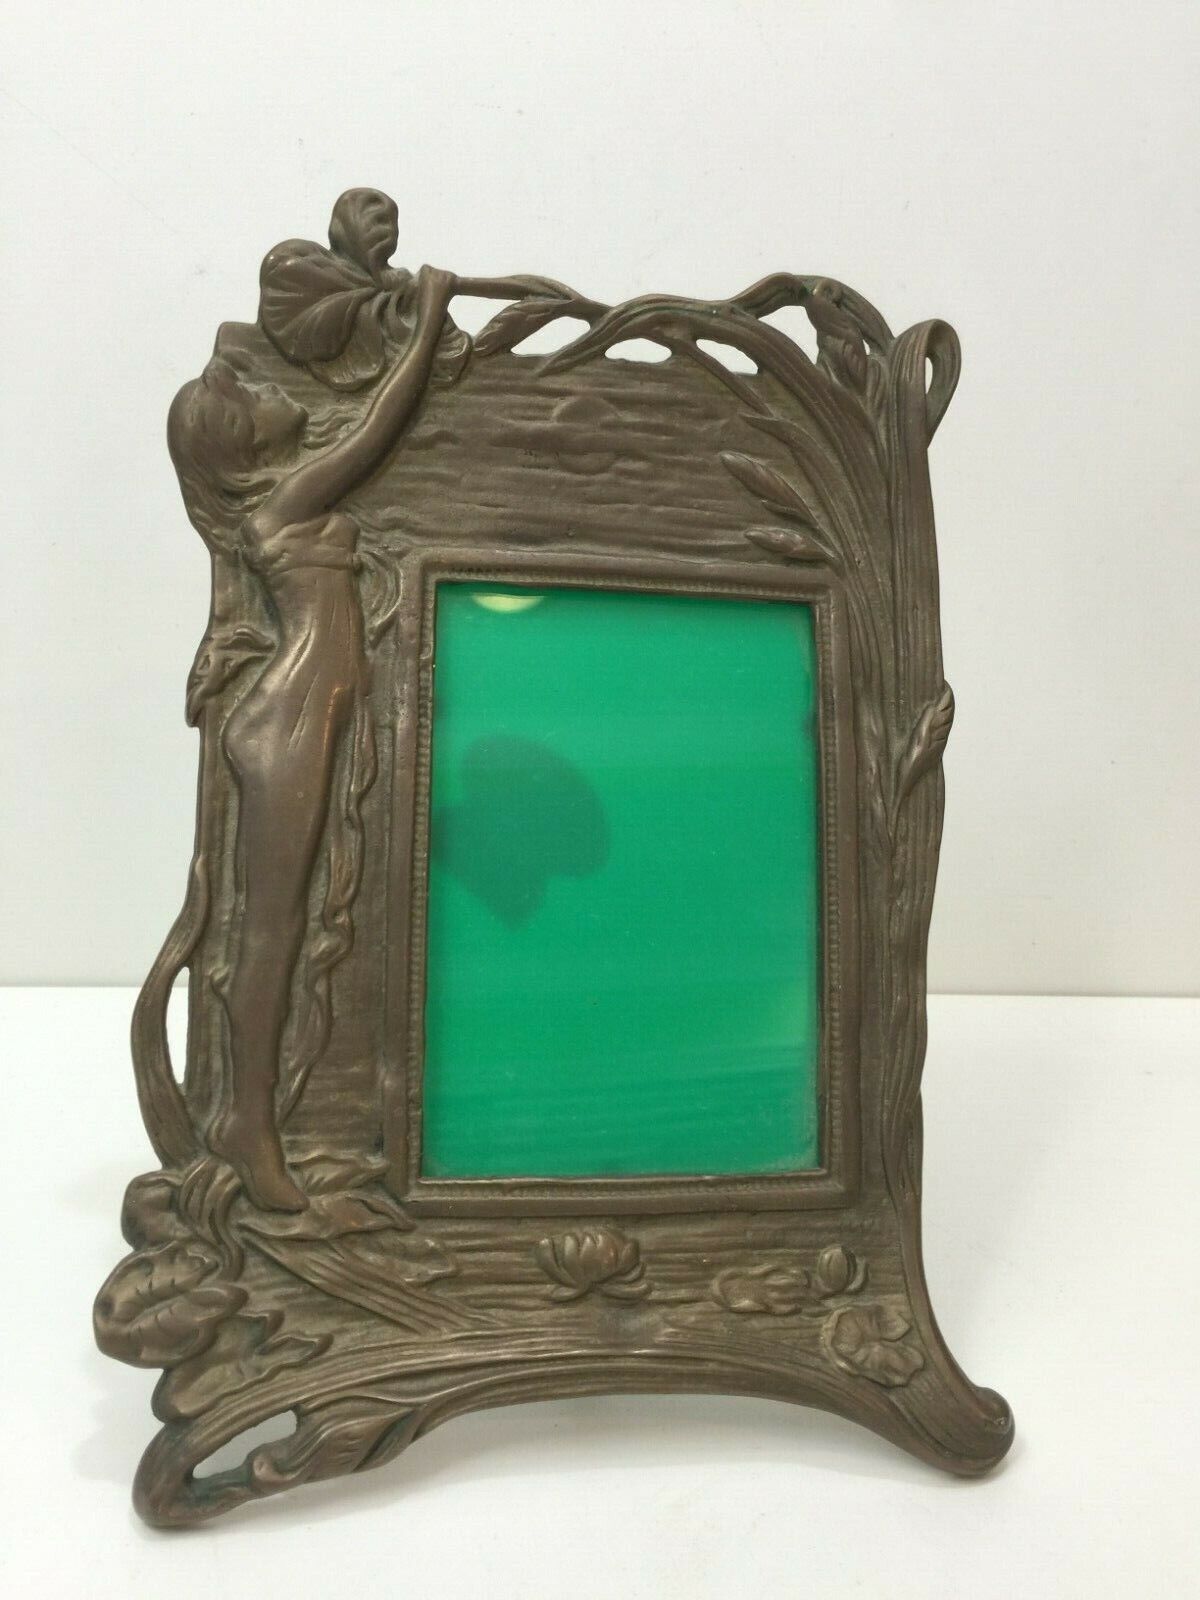 Vintage Handcrafted Decorative Crafts Brass Photo Frame with Nude Sculpture